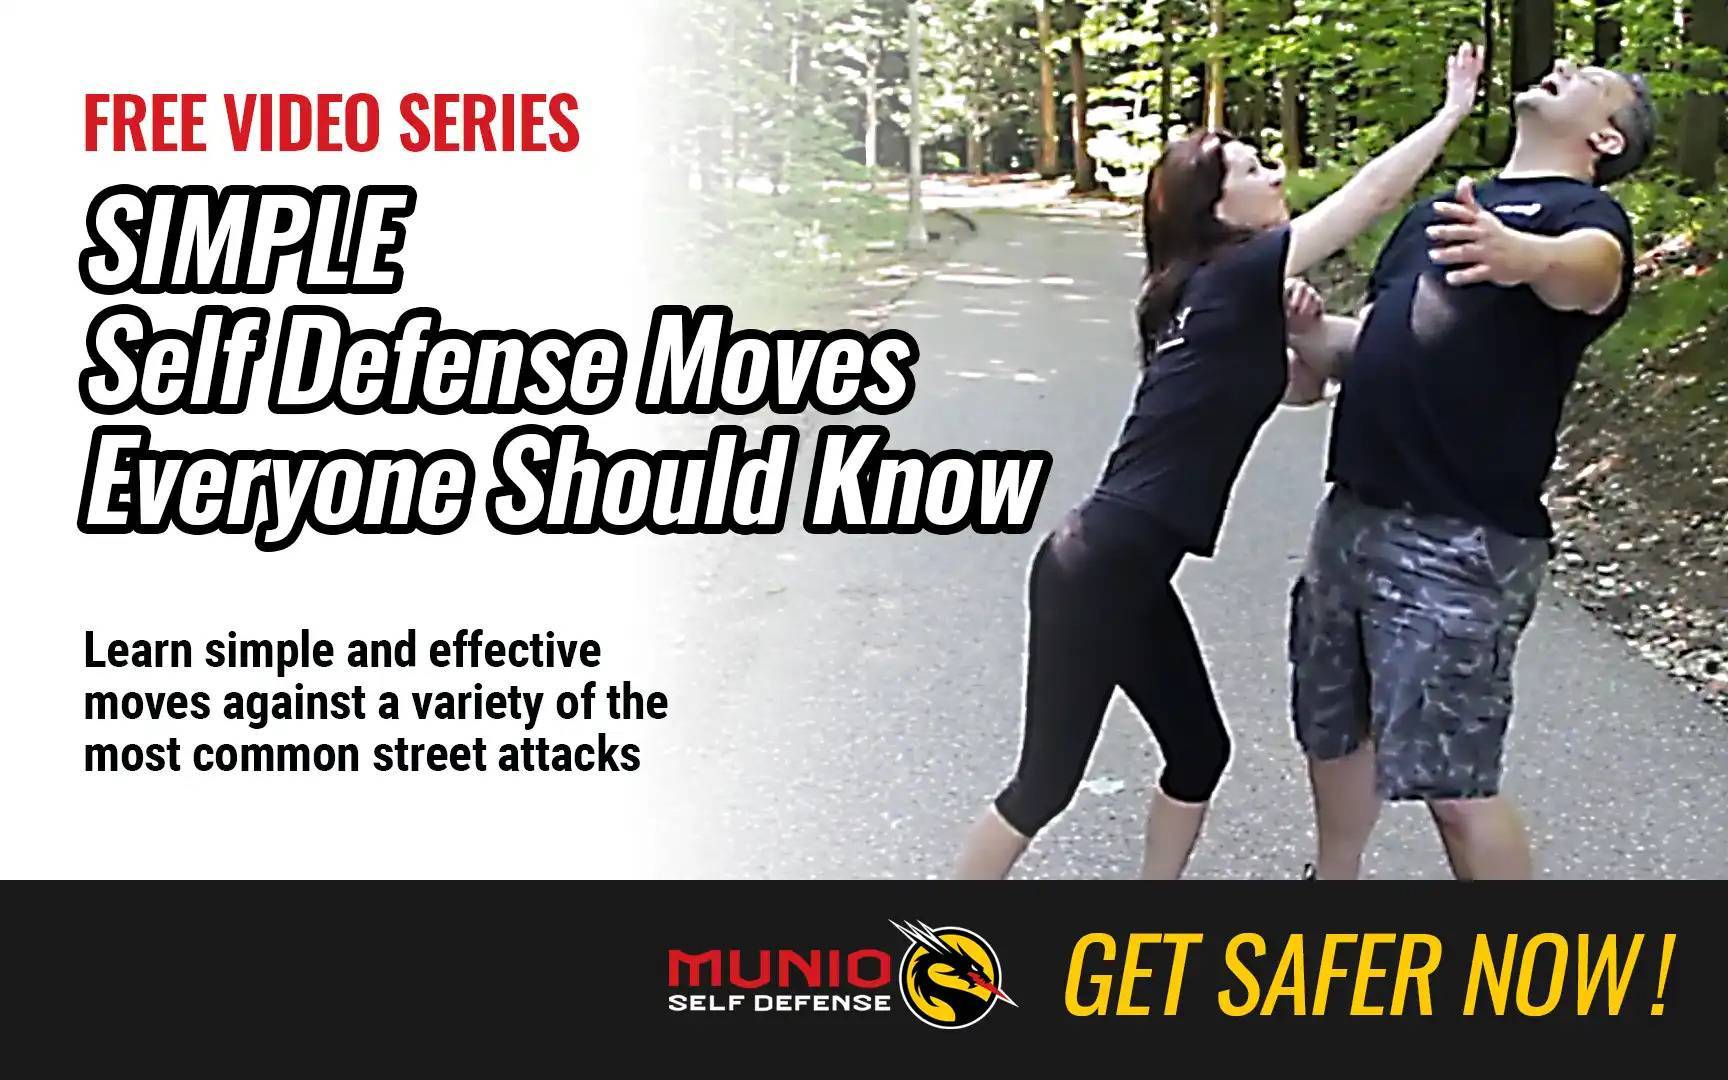 5 self-defense moves everyone should know - ABC News